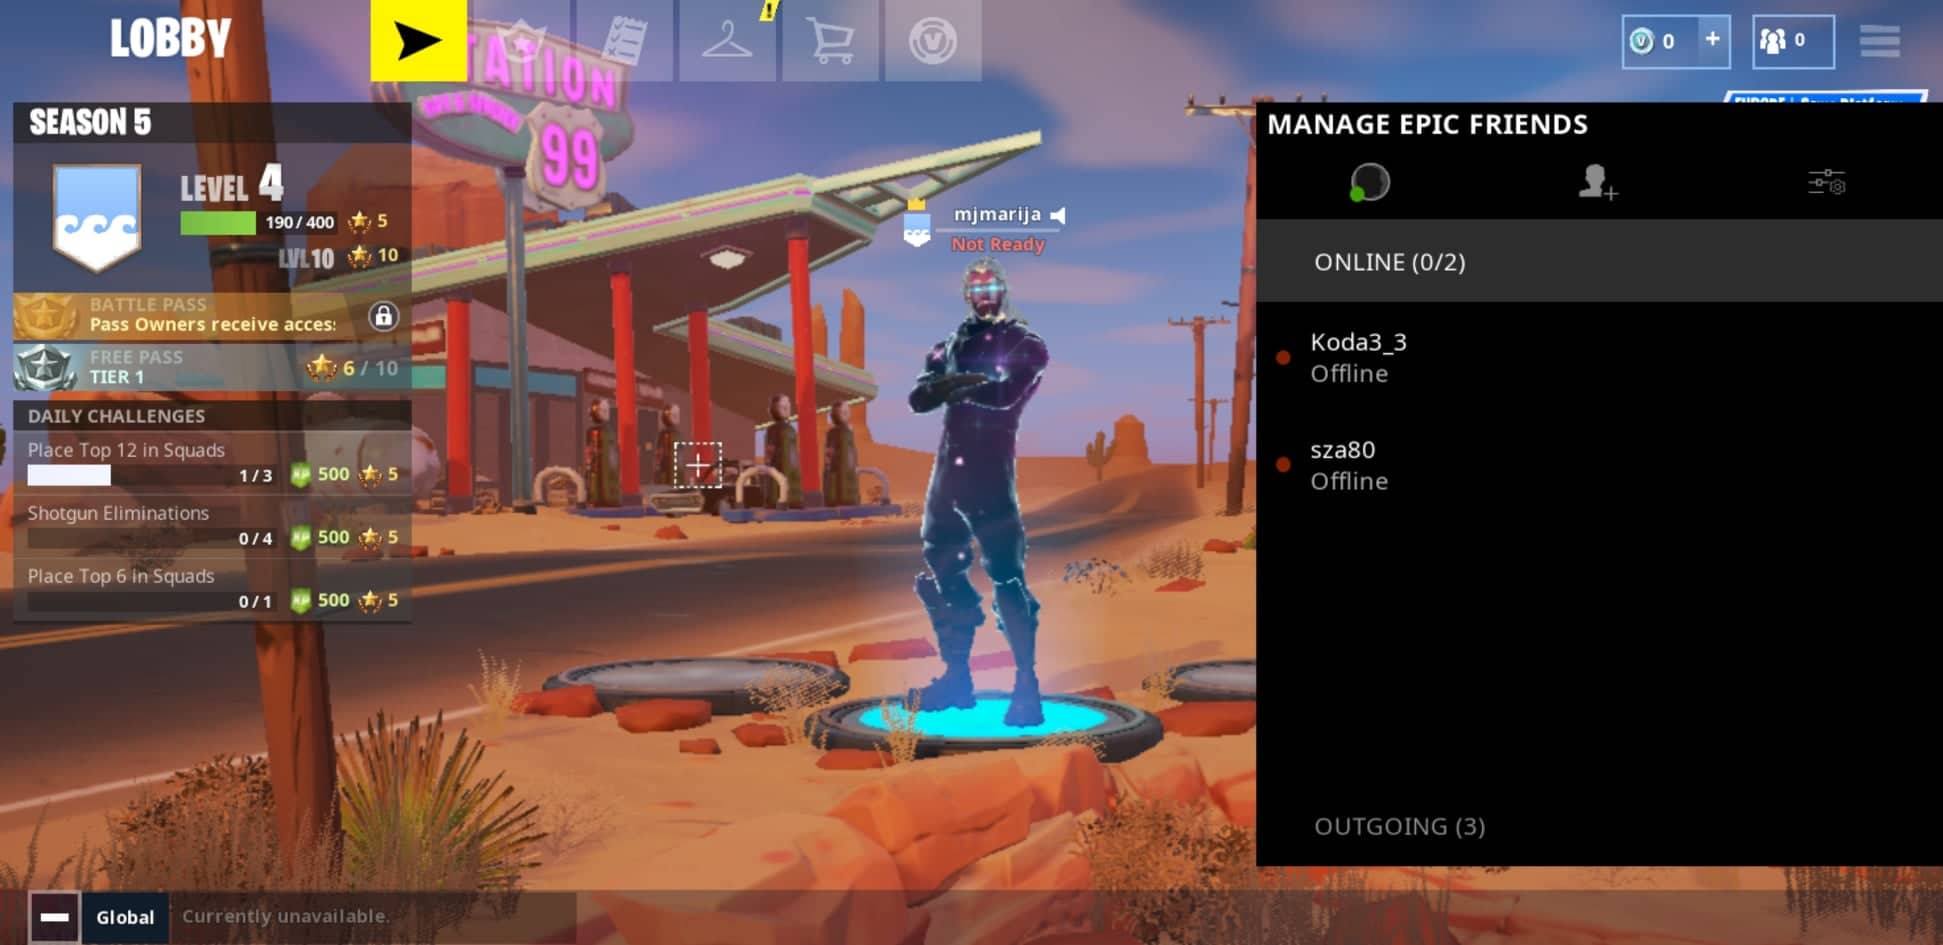 Selling Brand New Linkable Epicgames Account With E Mail Access Fortnite Galaxy Skin Epicnpc Marketplace